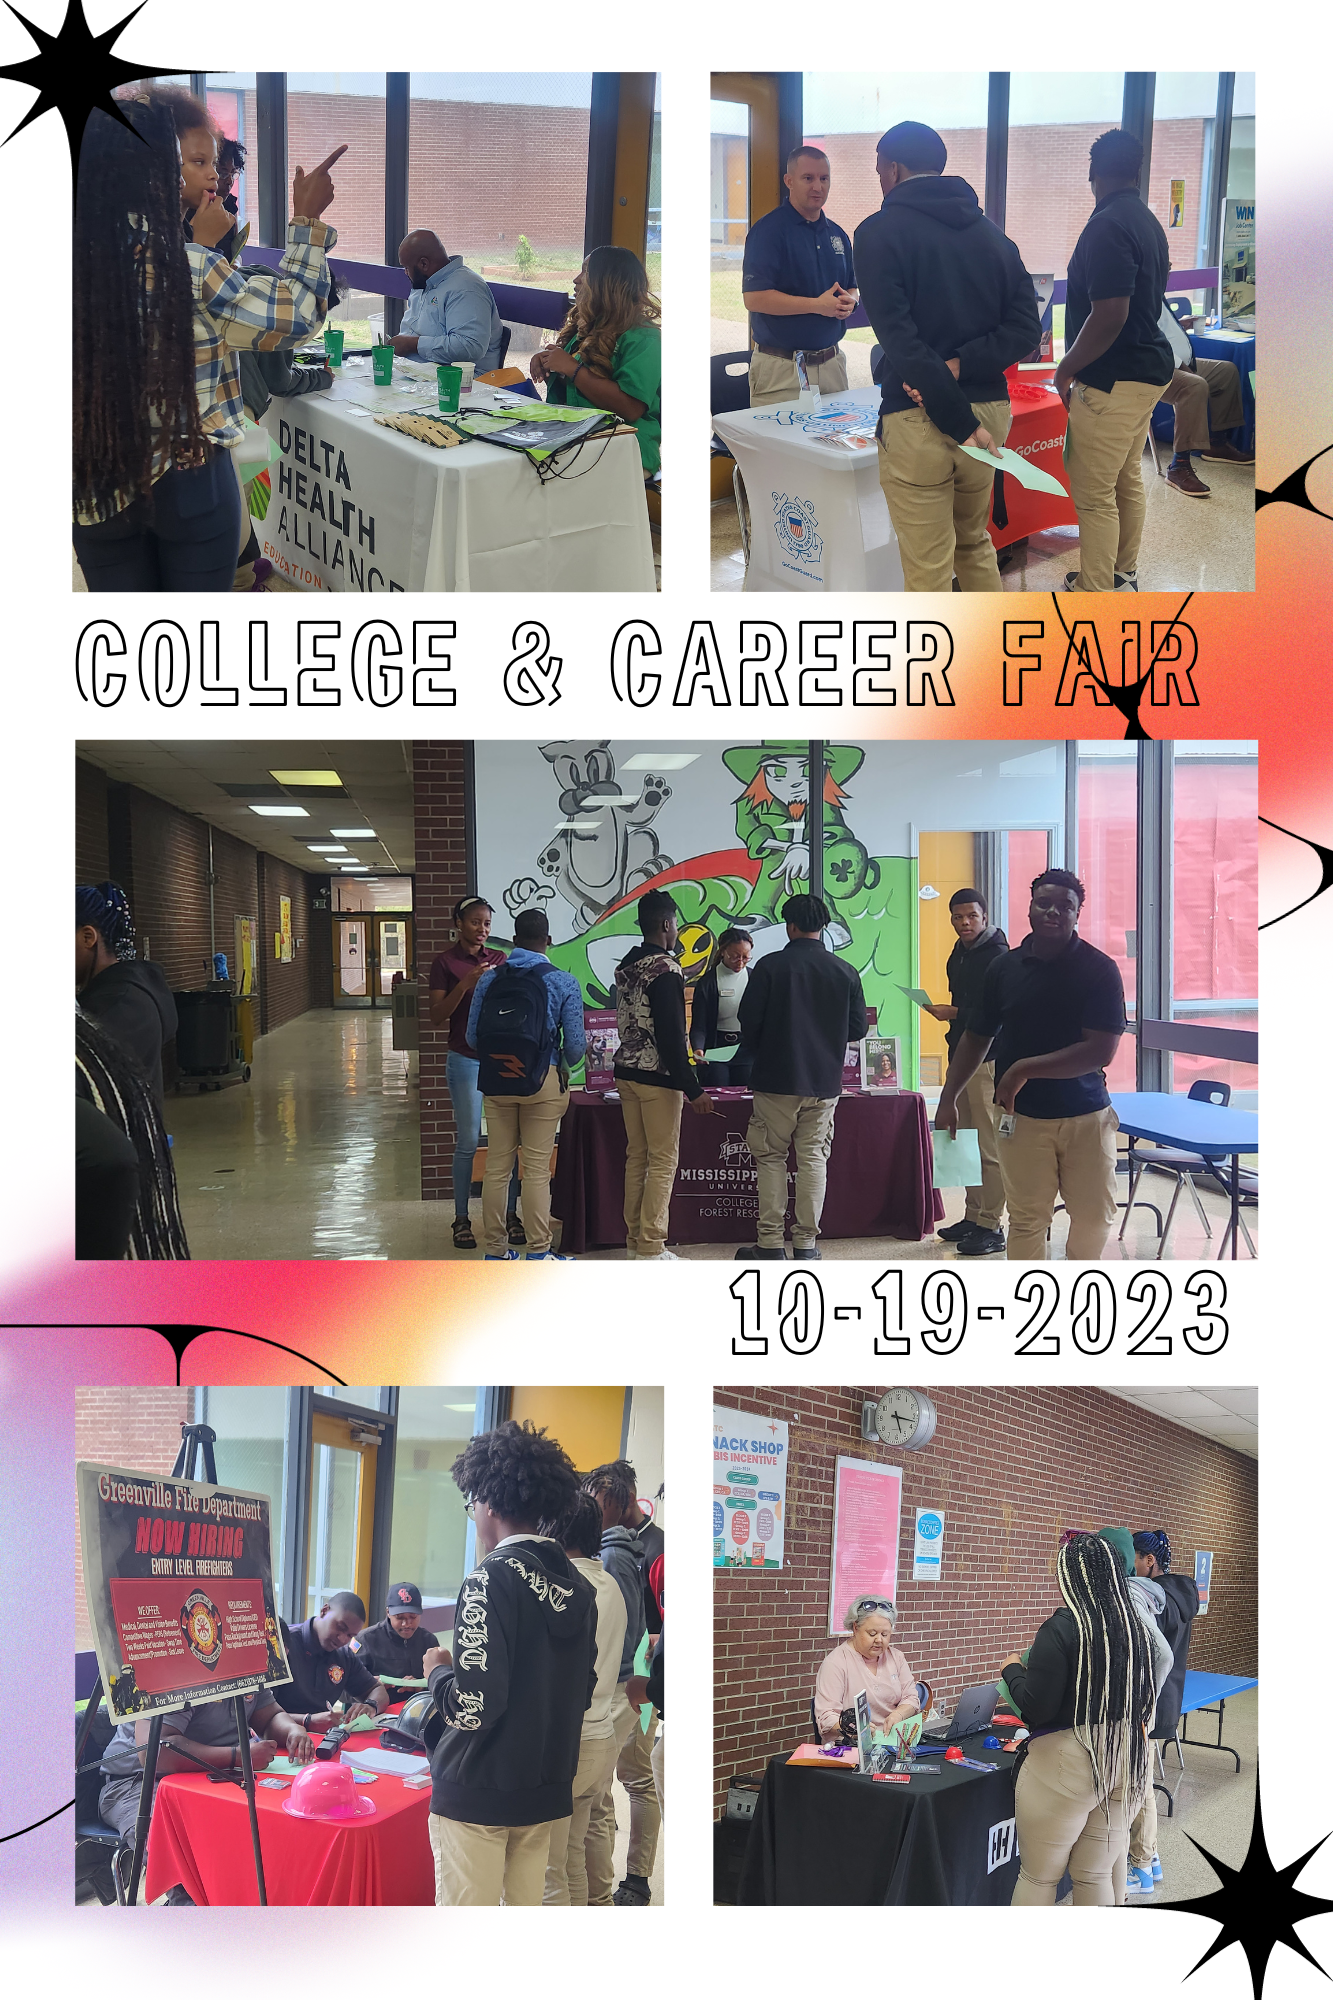 College and Career Fair 10-19-2023